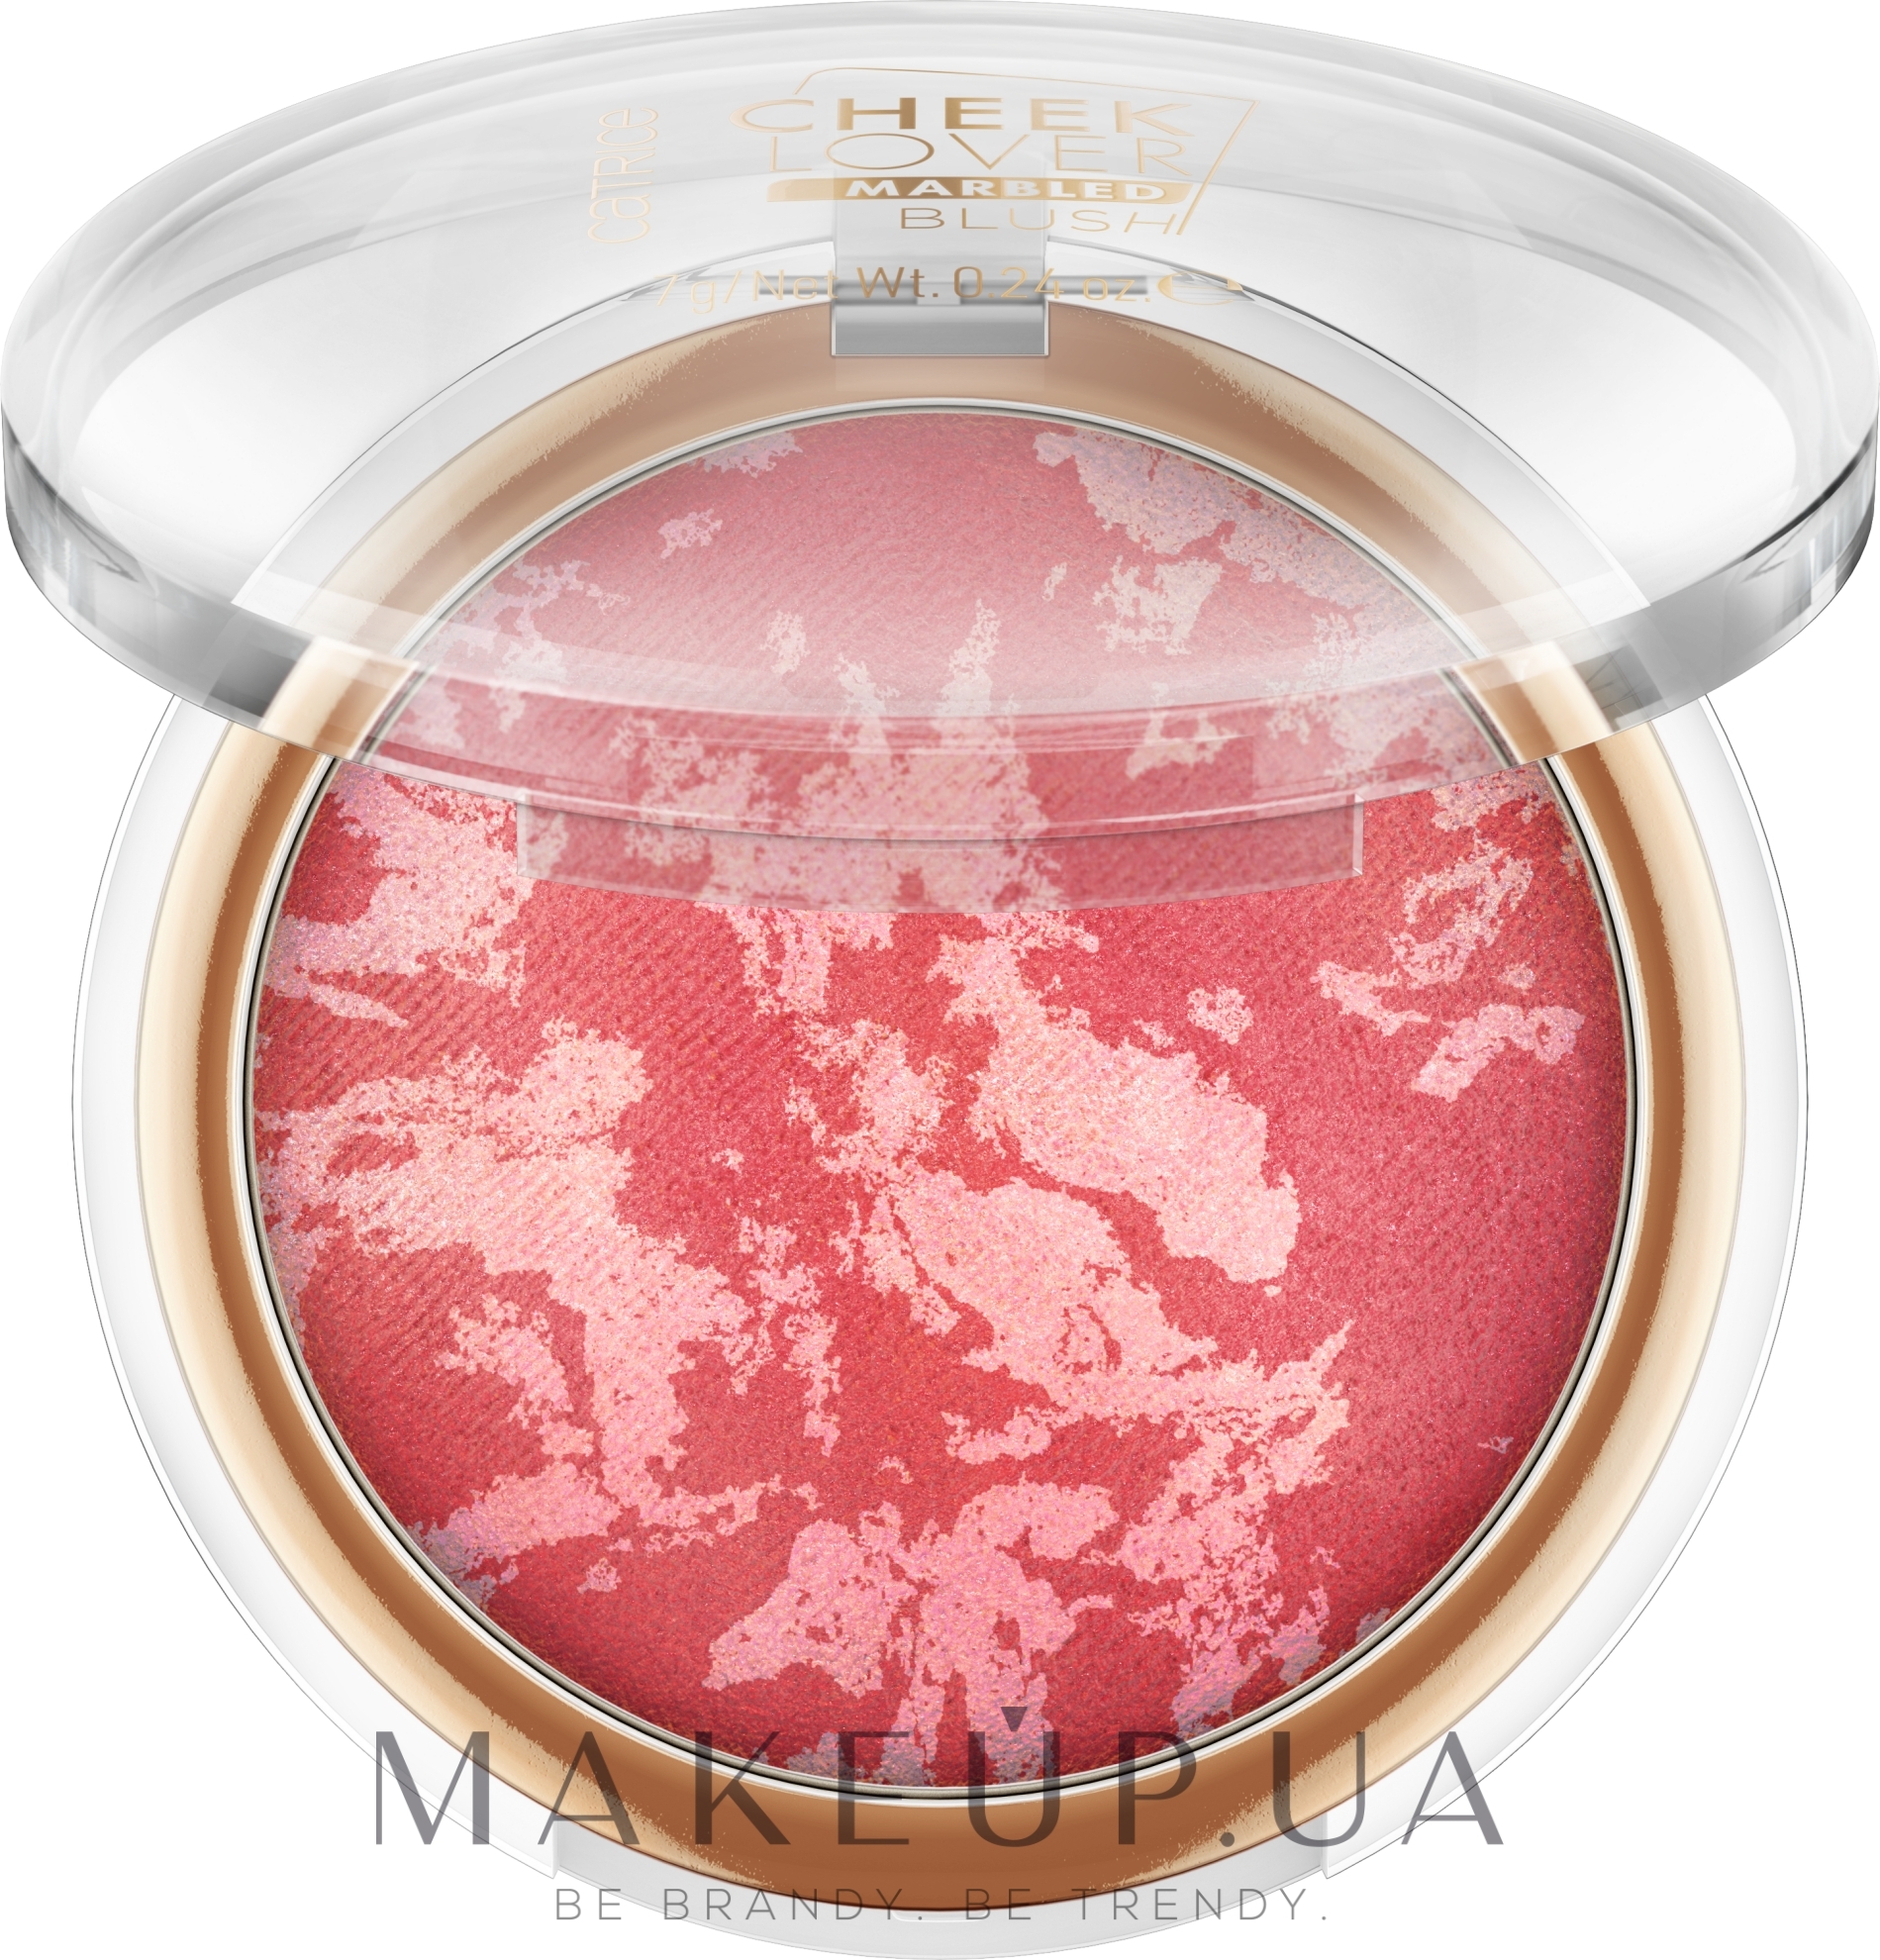 Catrice Catrice Cheek Lover Marbled Blush